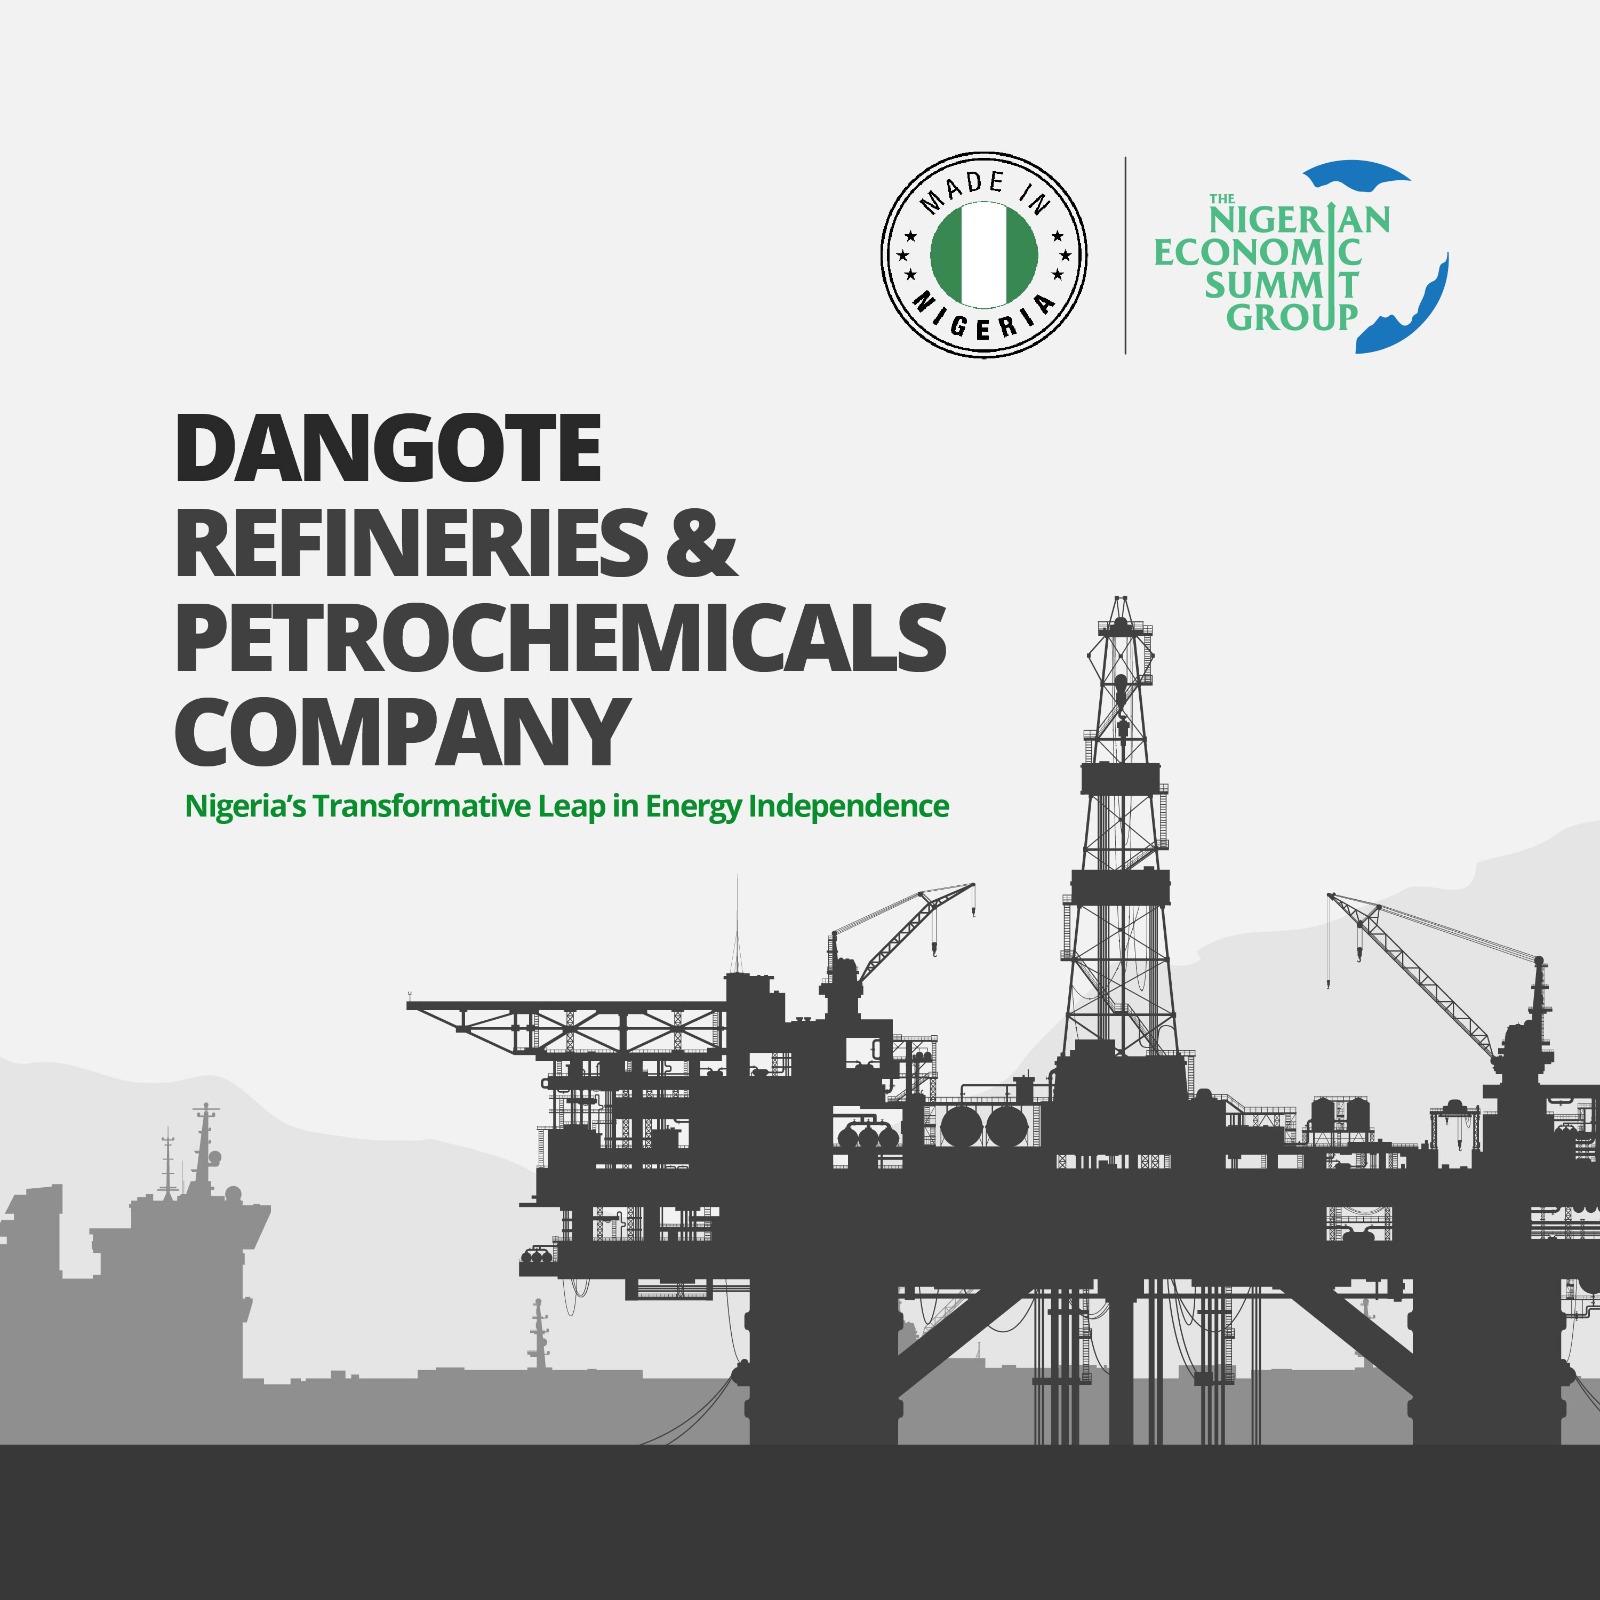 Dangote Refineries and Petrochemical Company: Nigeria's Transformative Leap in Energy Independence